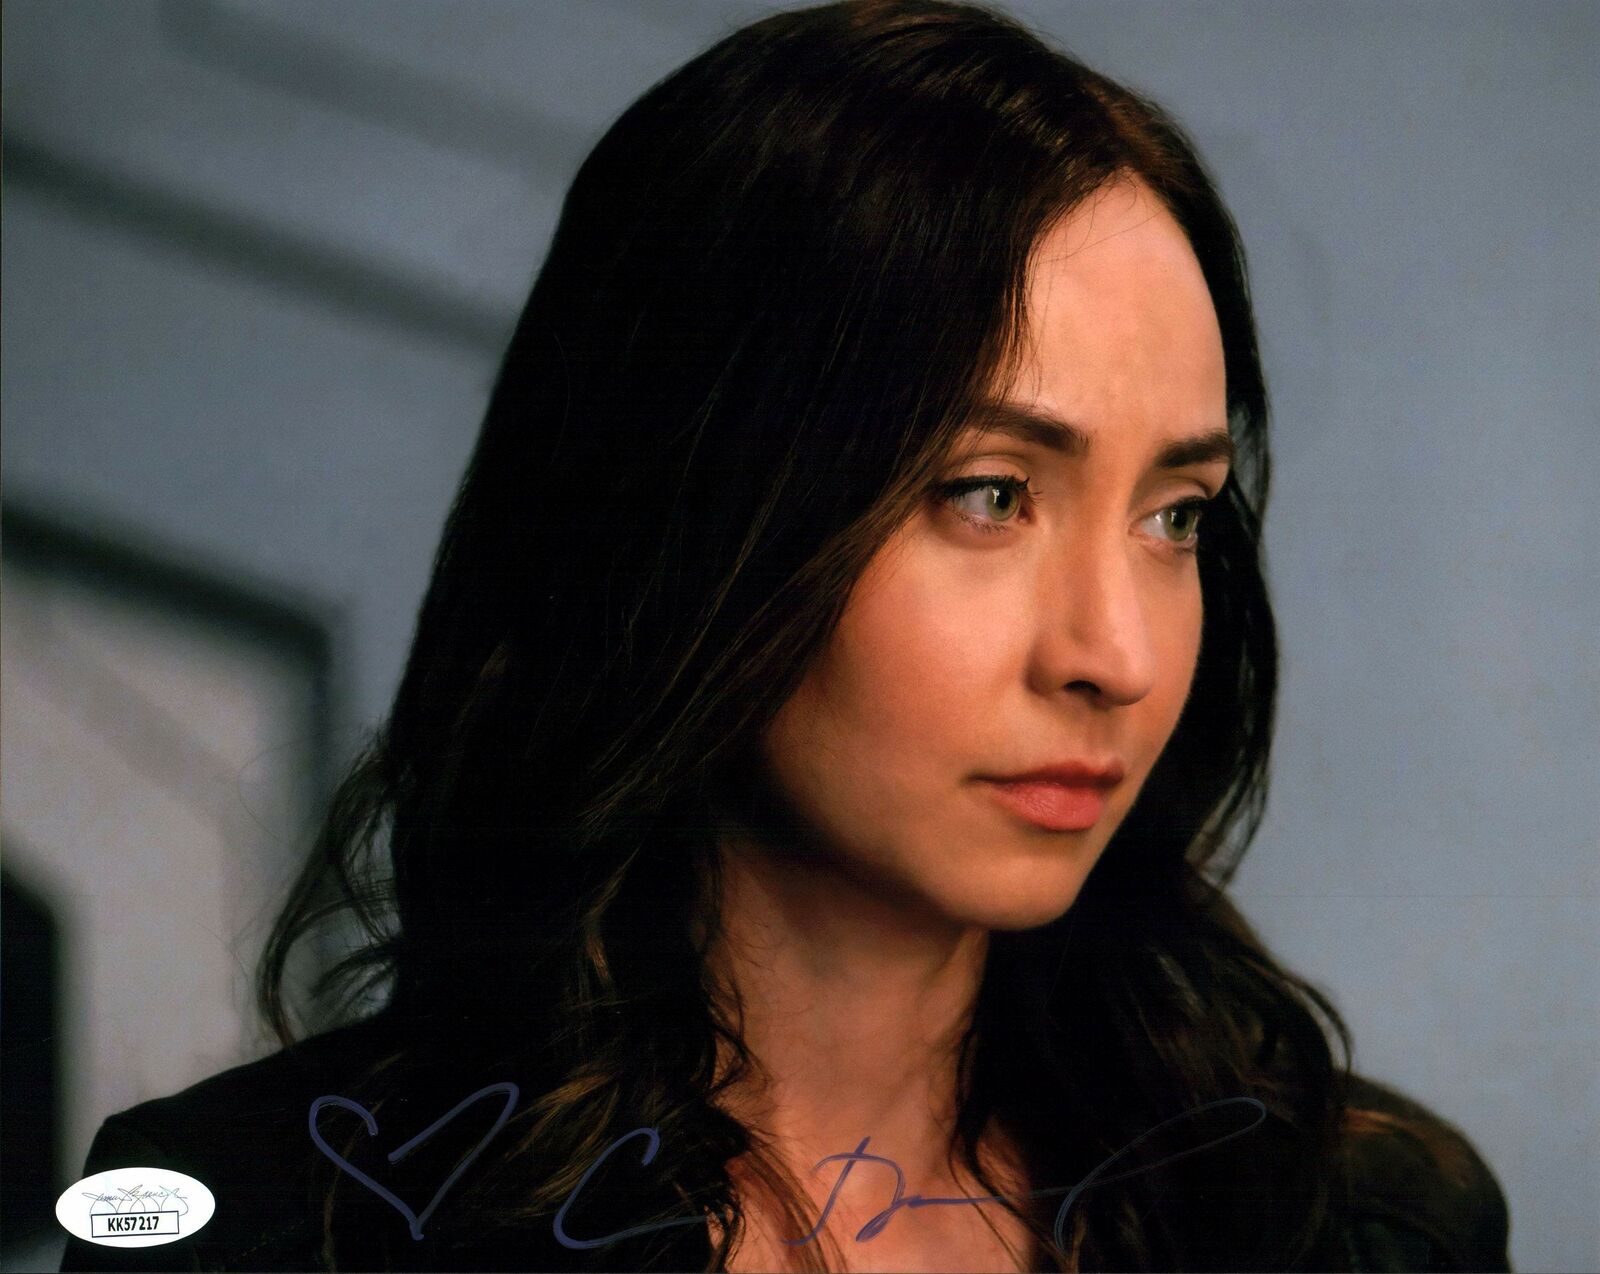 Courtney Ford Legends of Tomorrow 8x10 Photo Poster painting Signed Autograph JSA Certified COA